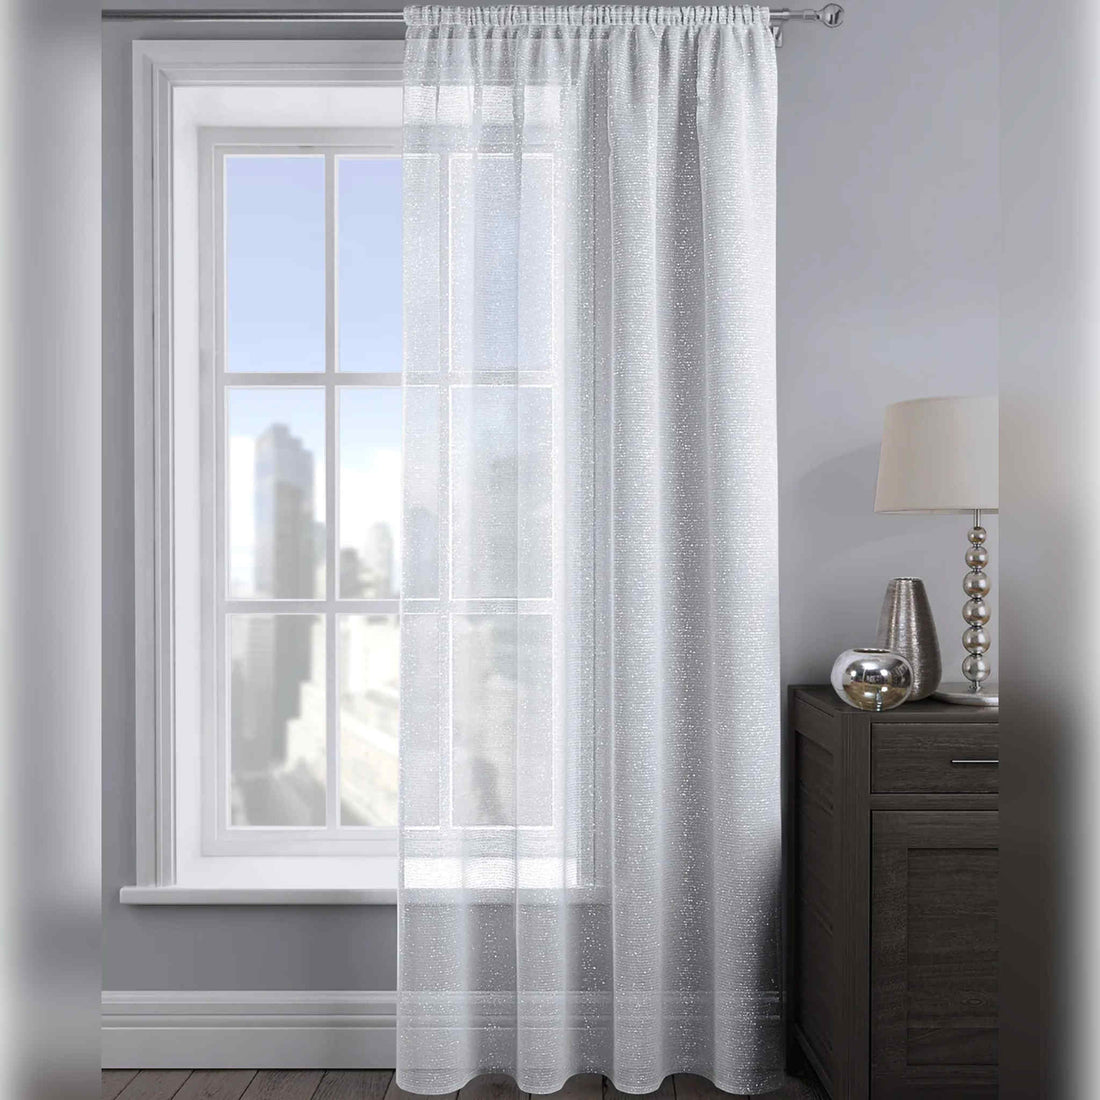 Velosso Alessandria Voile Panels Tape Top Curtains | 54x48in